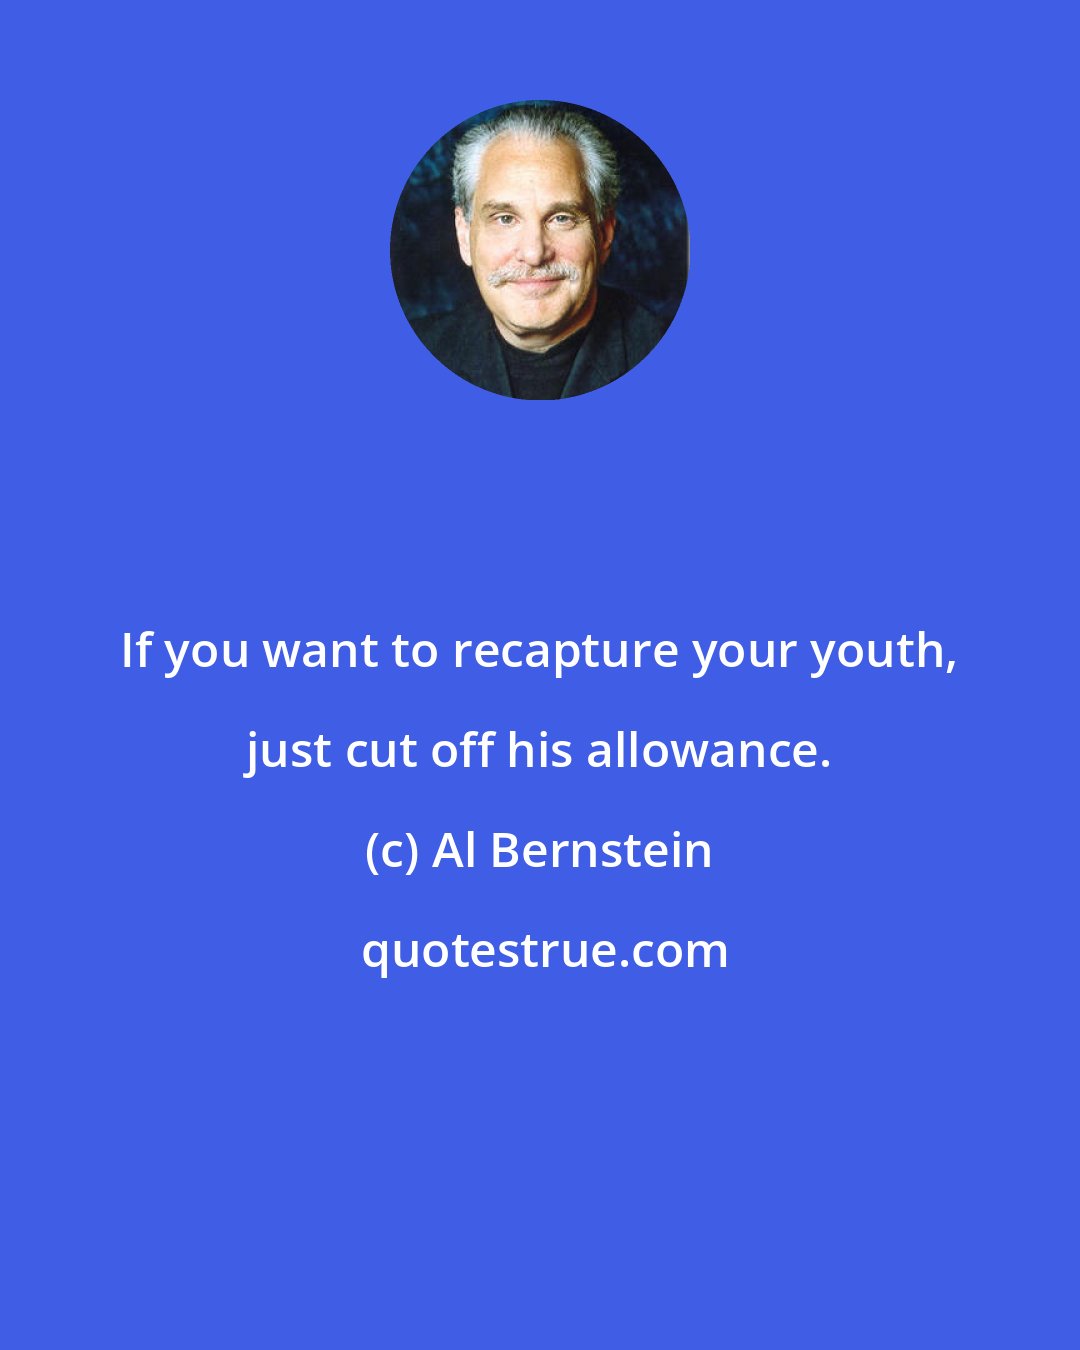 Al Bernstein: If you want to recapture your youth, just cut off his allowance.